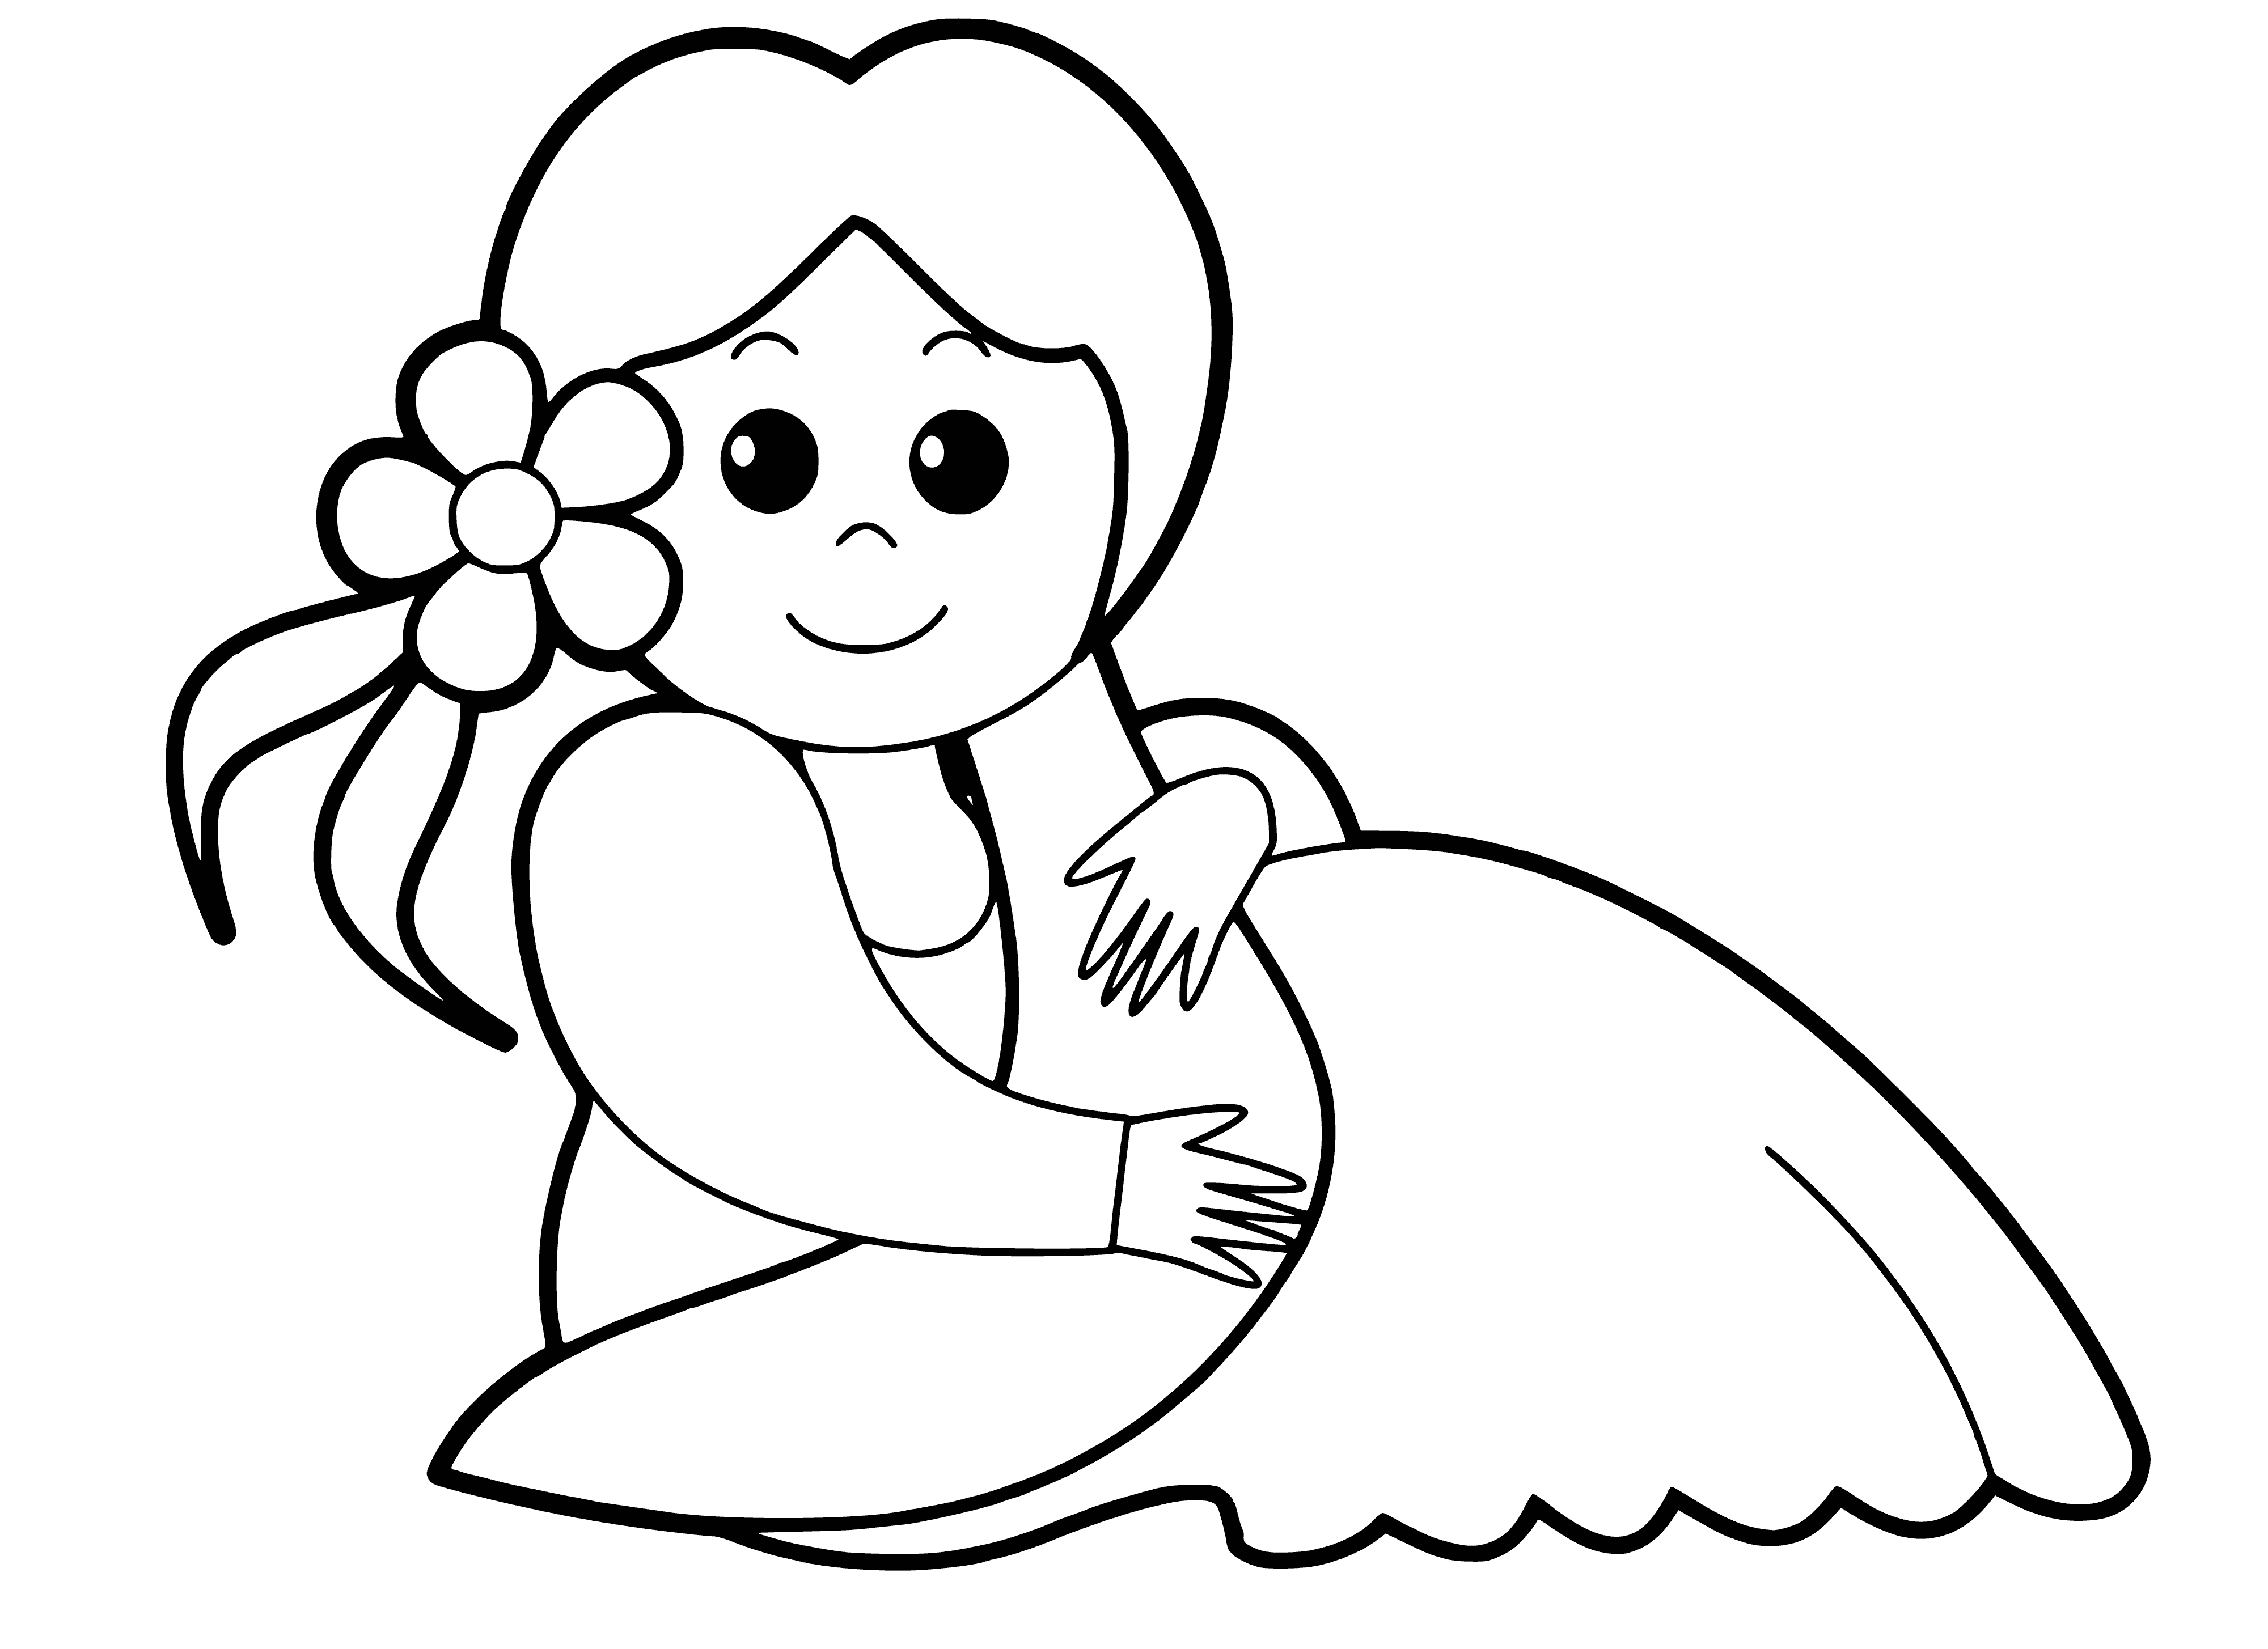 coloring page: Girl stands in garden, smiling & holding flower; long hair blowing in wind. #summer #happy.